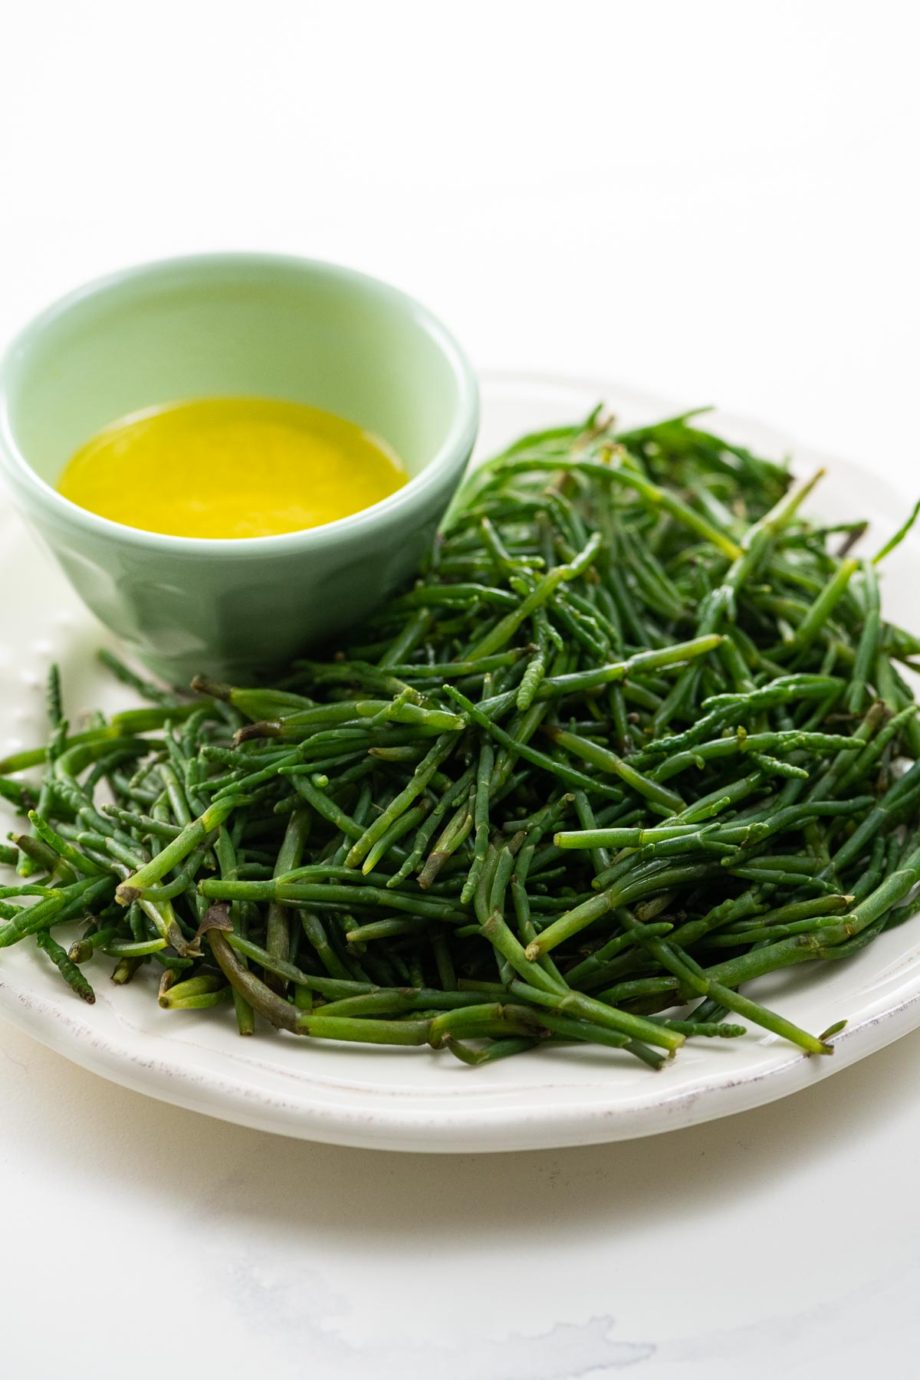 sea beans on a plate with a bowl of lemon butter for dipping